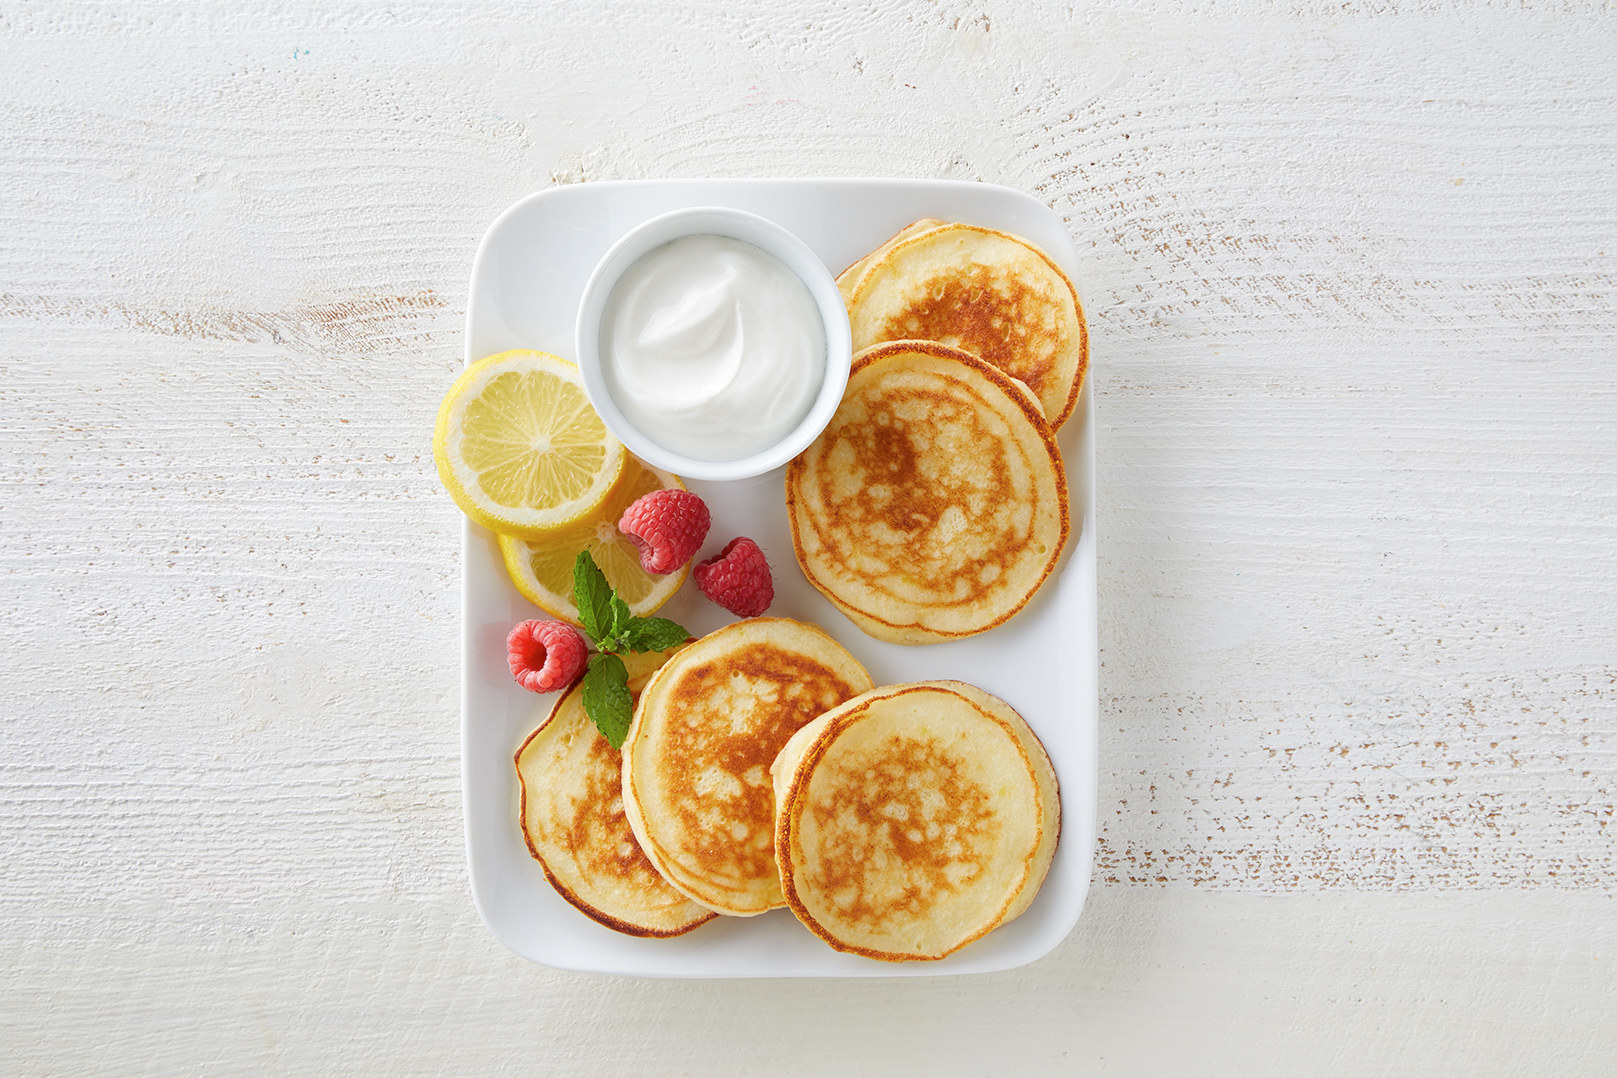 A plate of pancake-like cheese blintzes with strawberries, lemon slices, and sour cream.